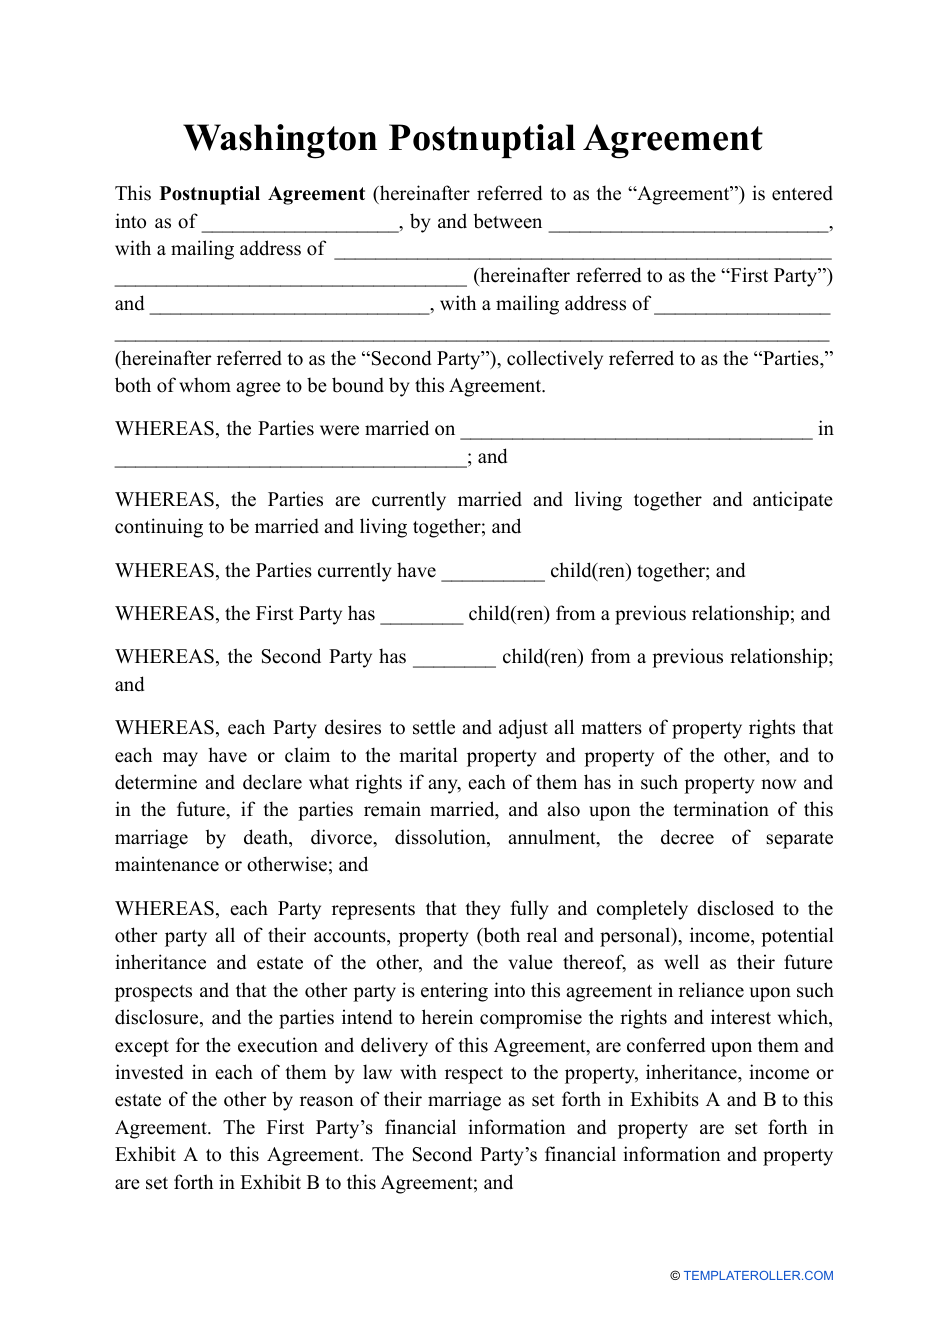 washington-postnuptial-agreement-template-fill-out-sign-online-and